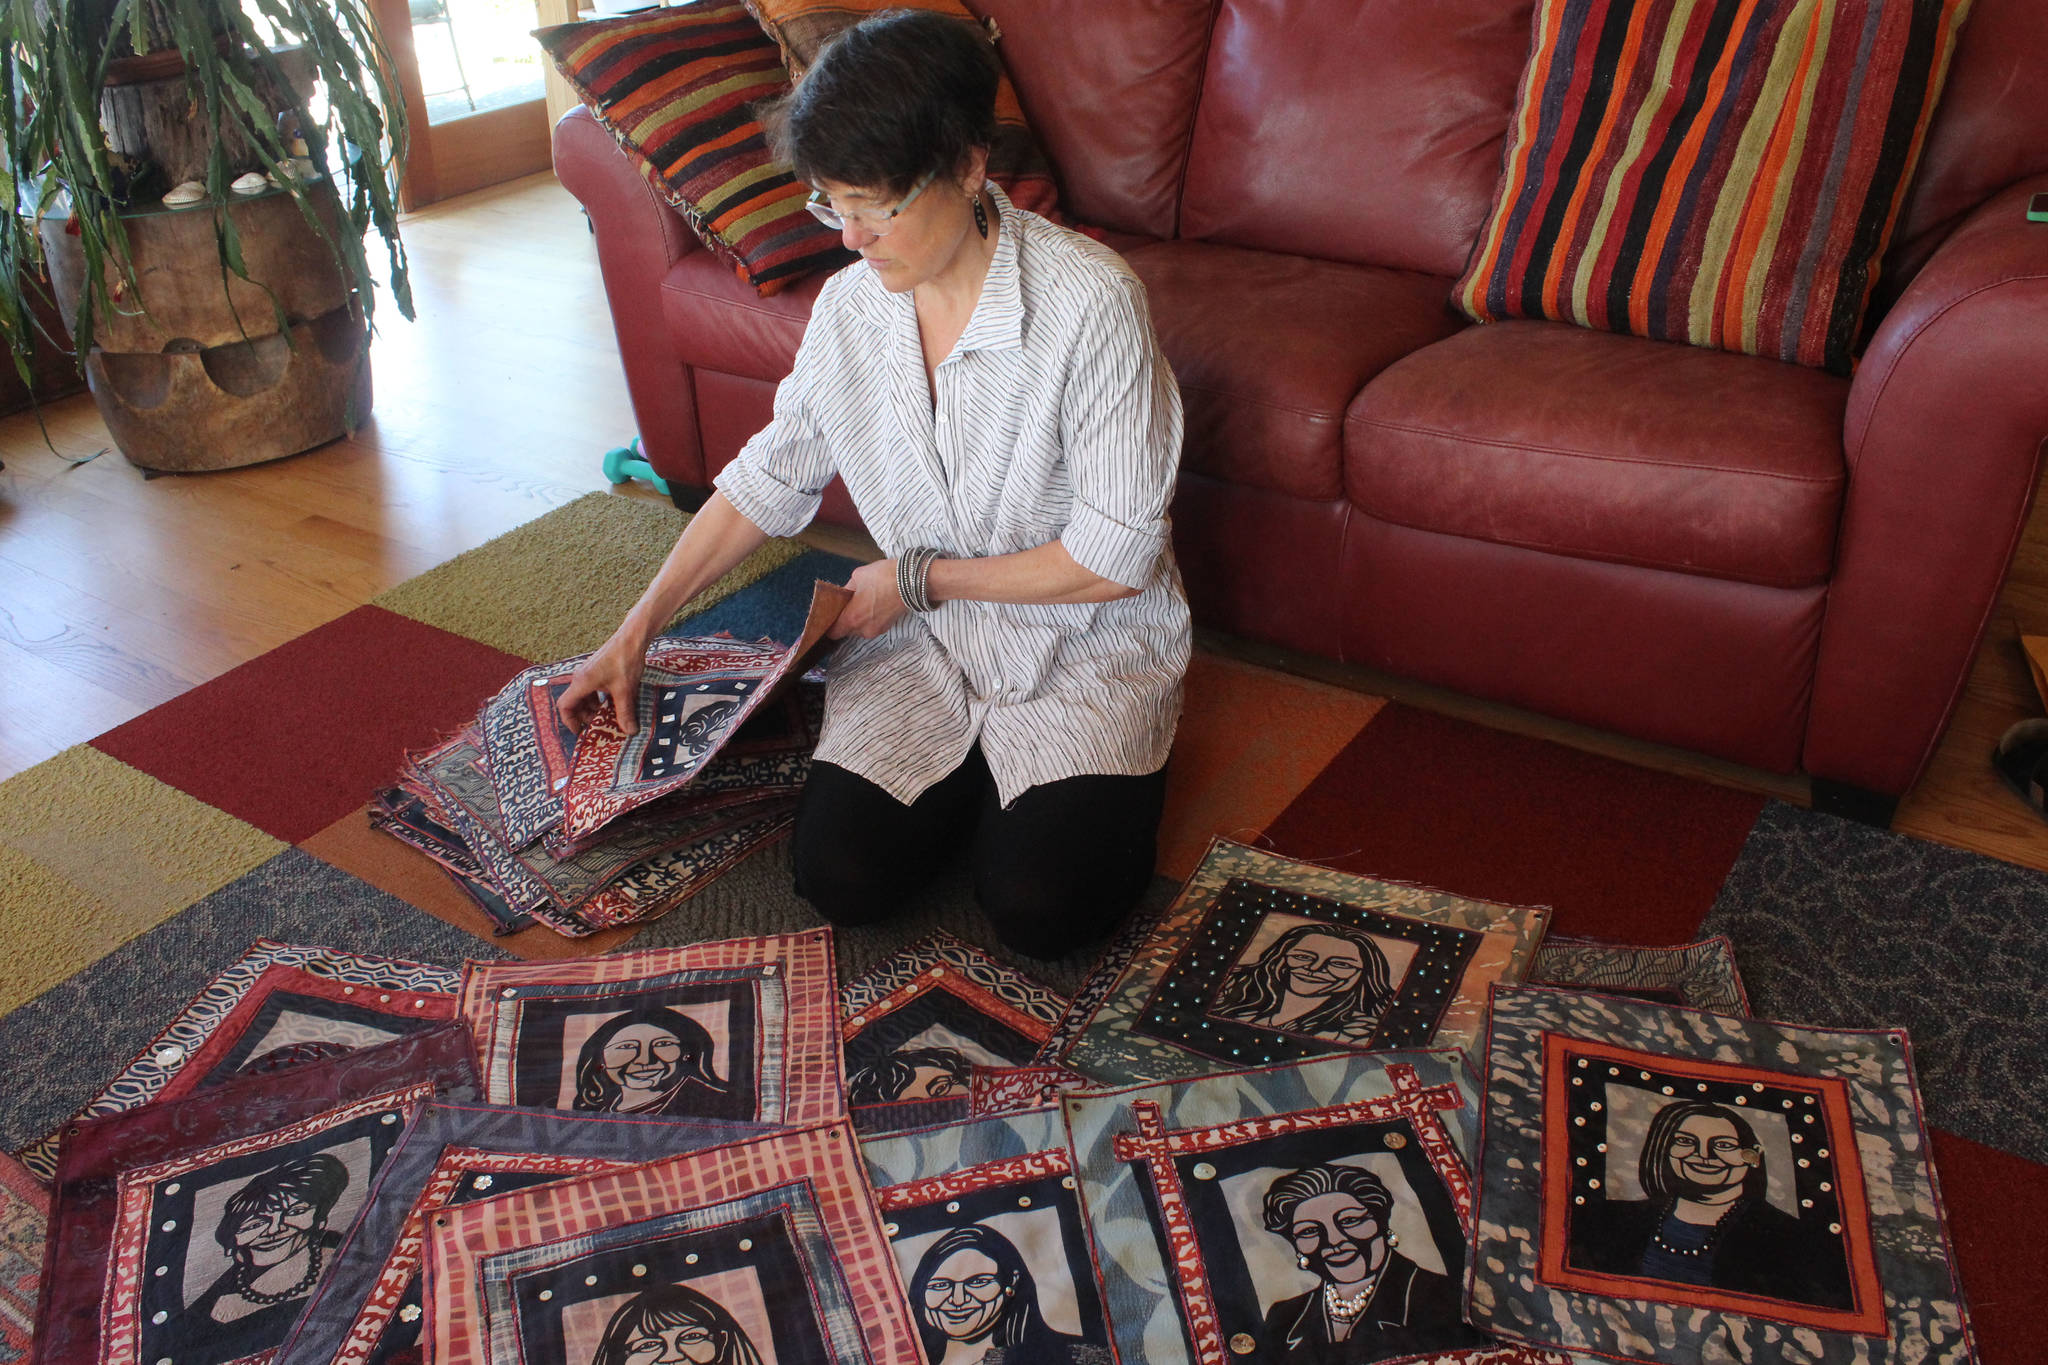 Fiber artist Cheryl Lawrence spreads out a selection of her 131 katazome textile art portraits of the women currently serving the 116th U.S. Congress